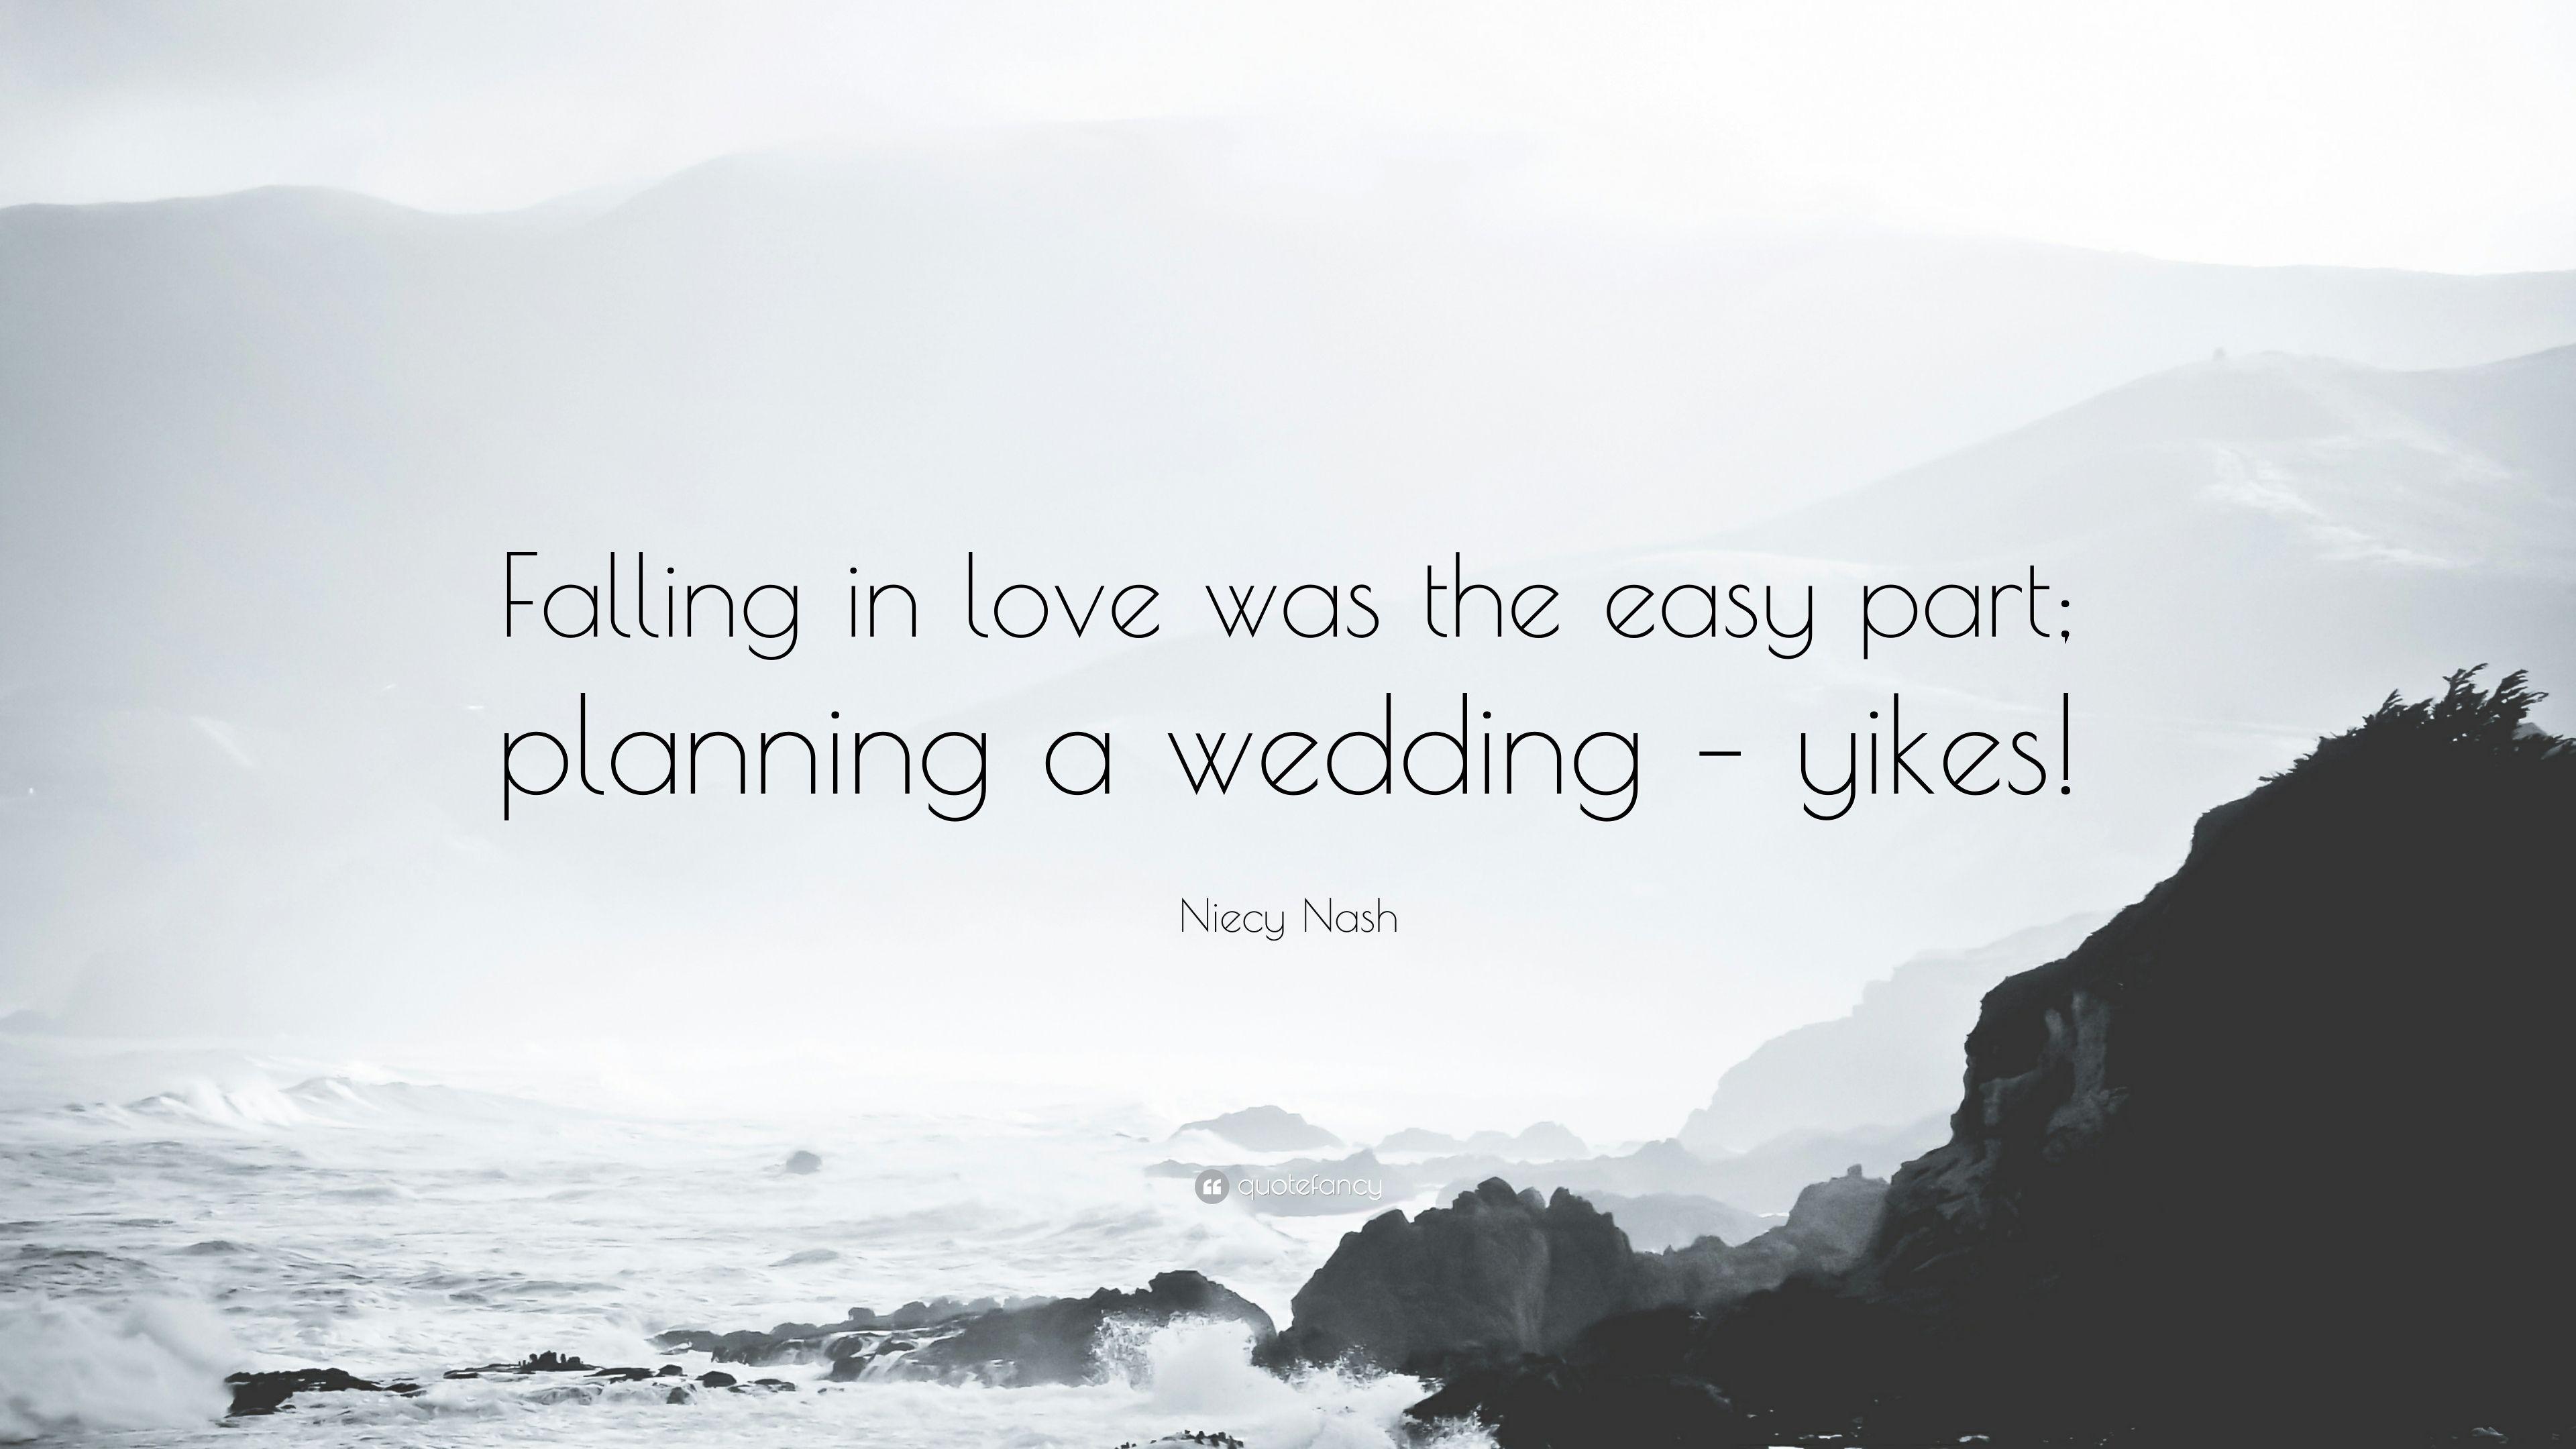 Niecy Nash Quote: “Falling in love was the easy part; planning a